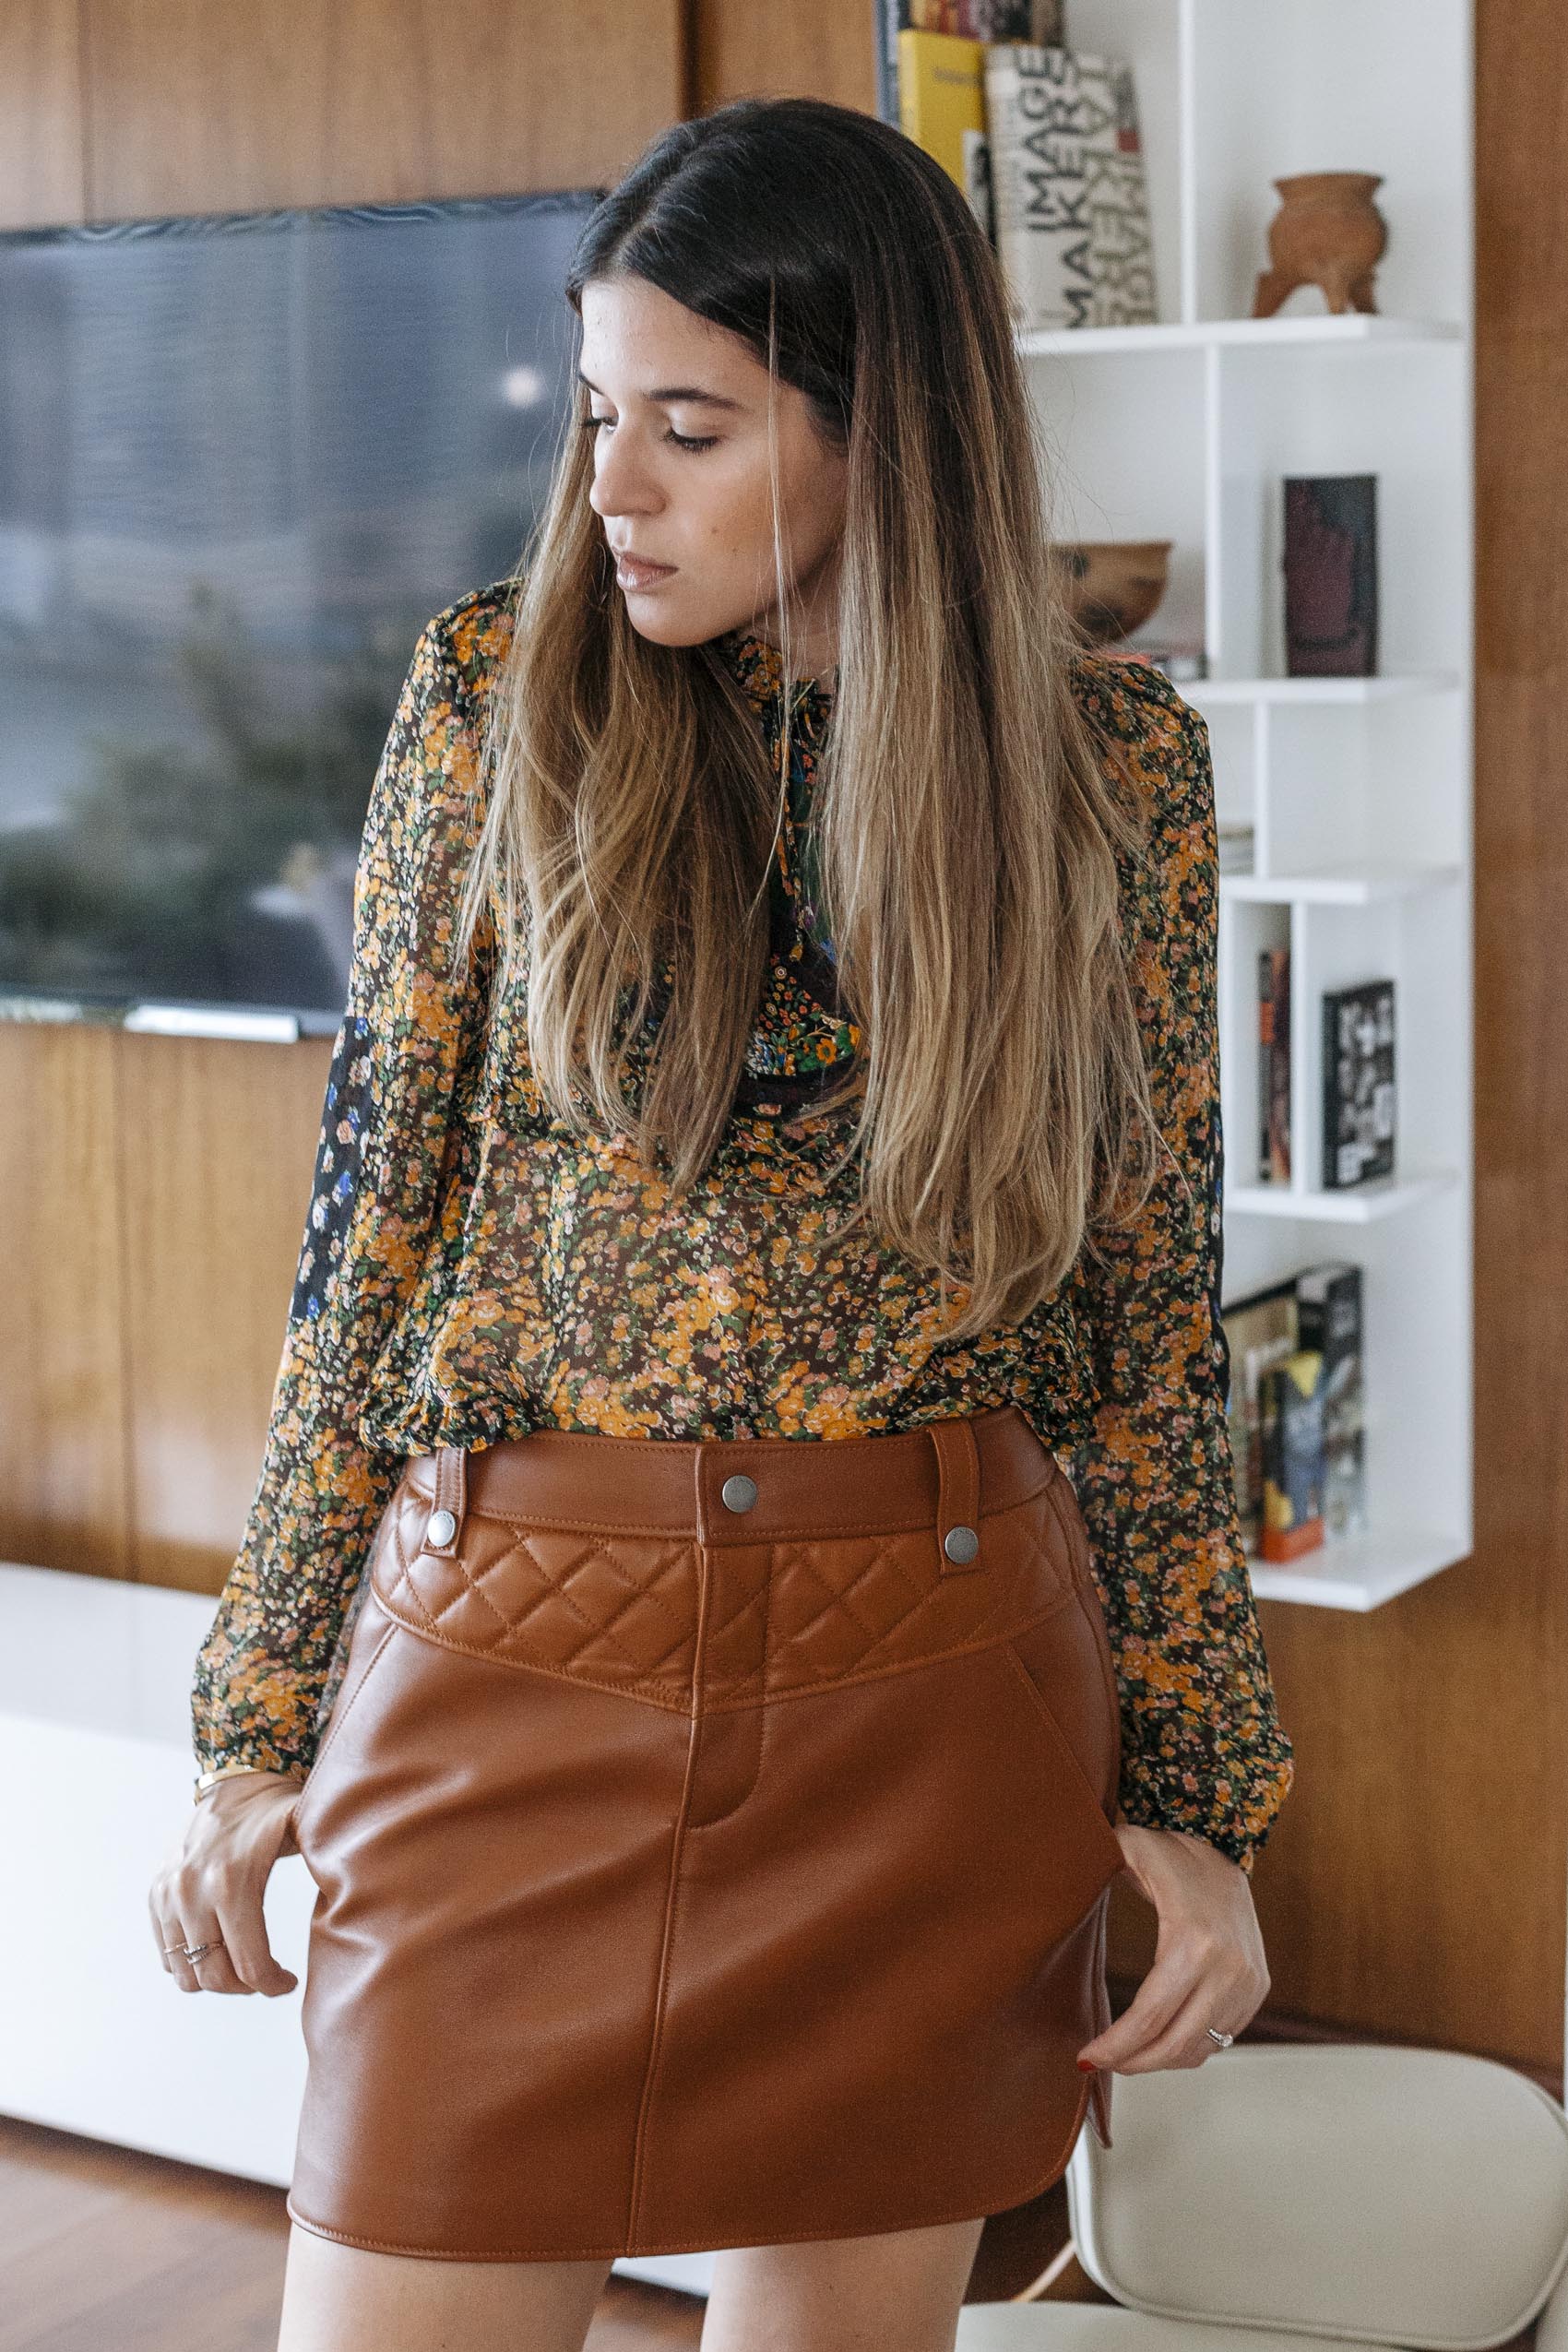 Maristella wears Coach 1941 floral blouse and tan leather skirt